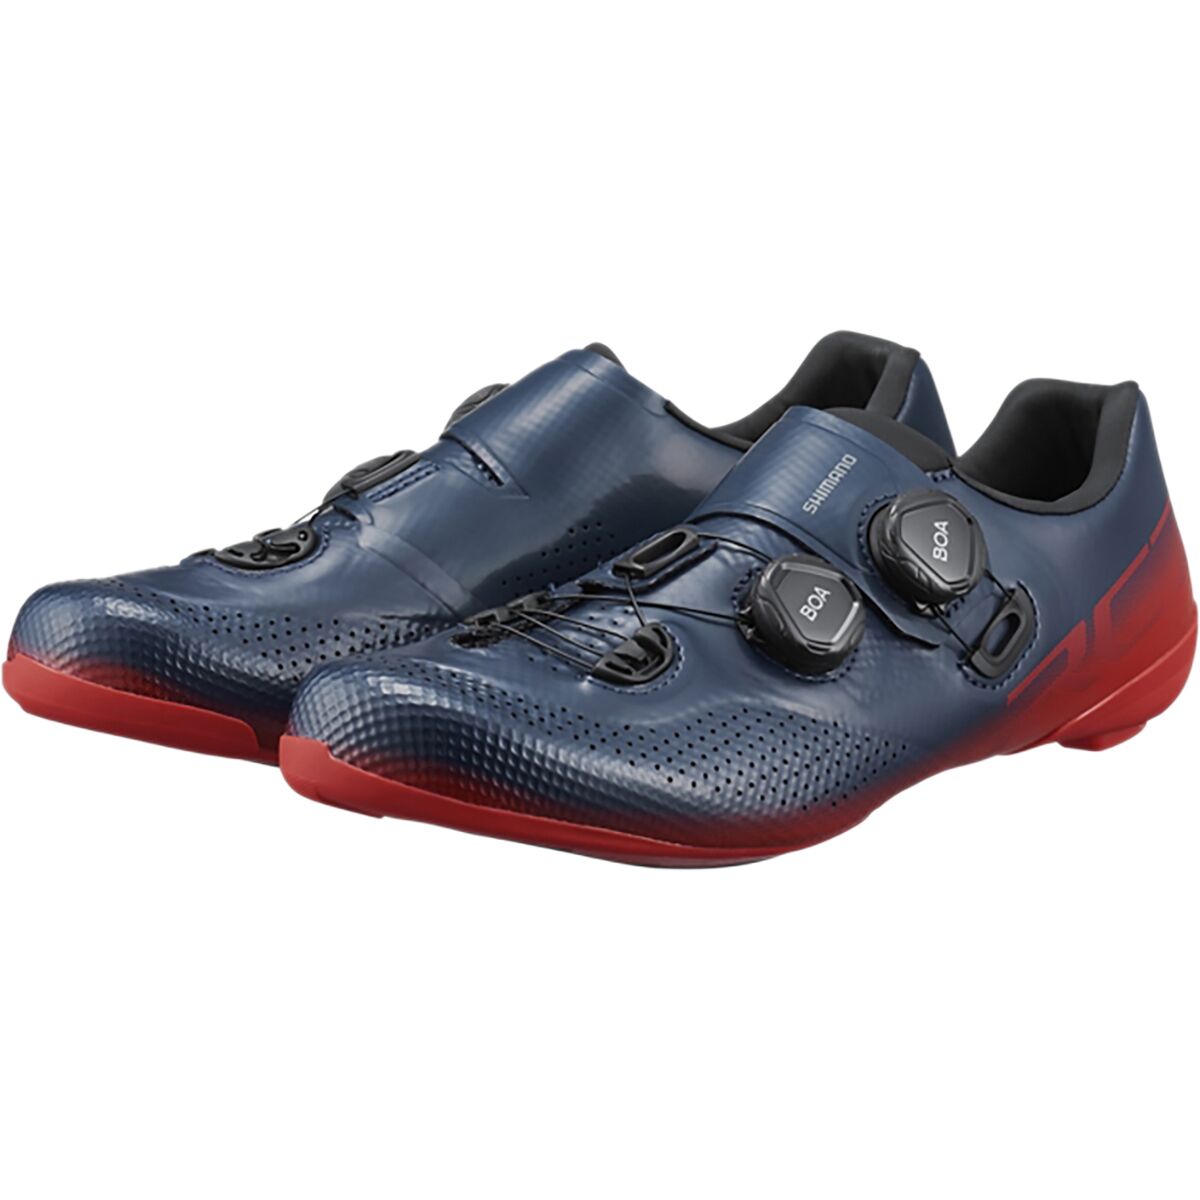 RC702 Limited Edition Cycling Shoe - Men's